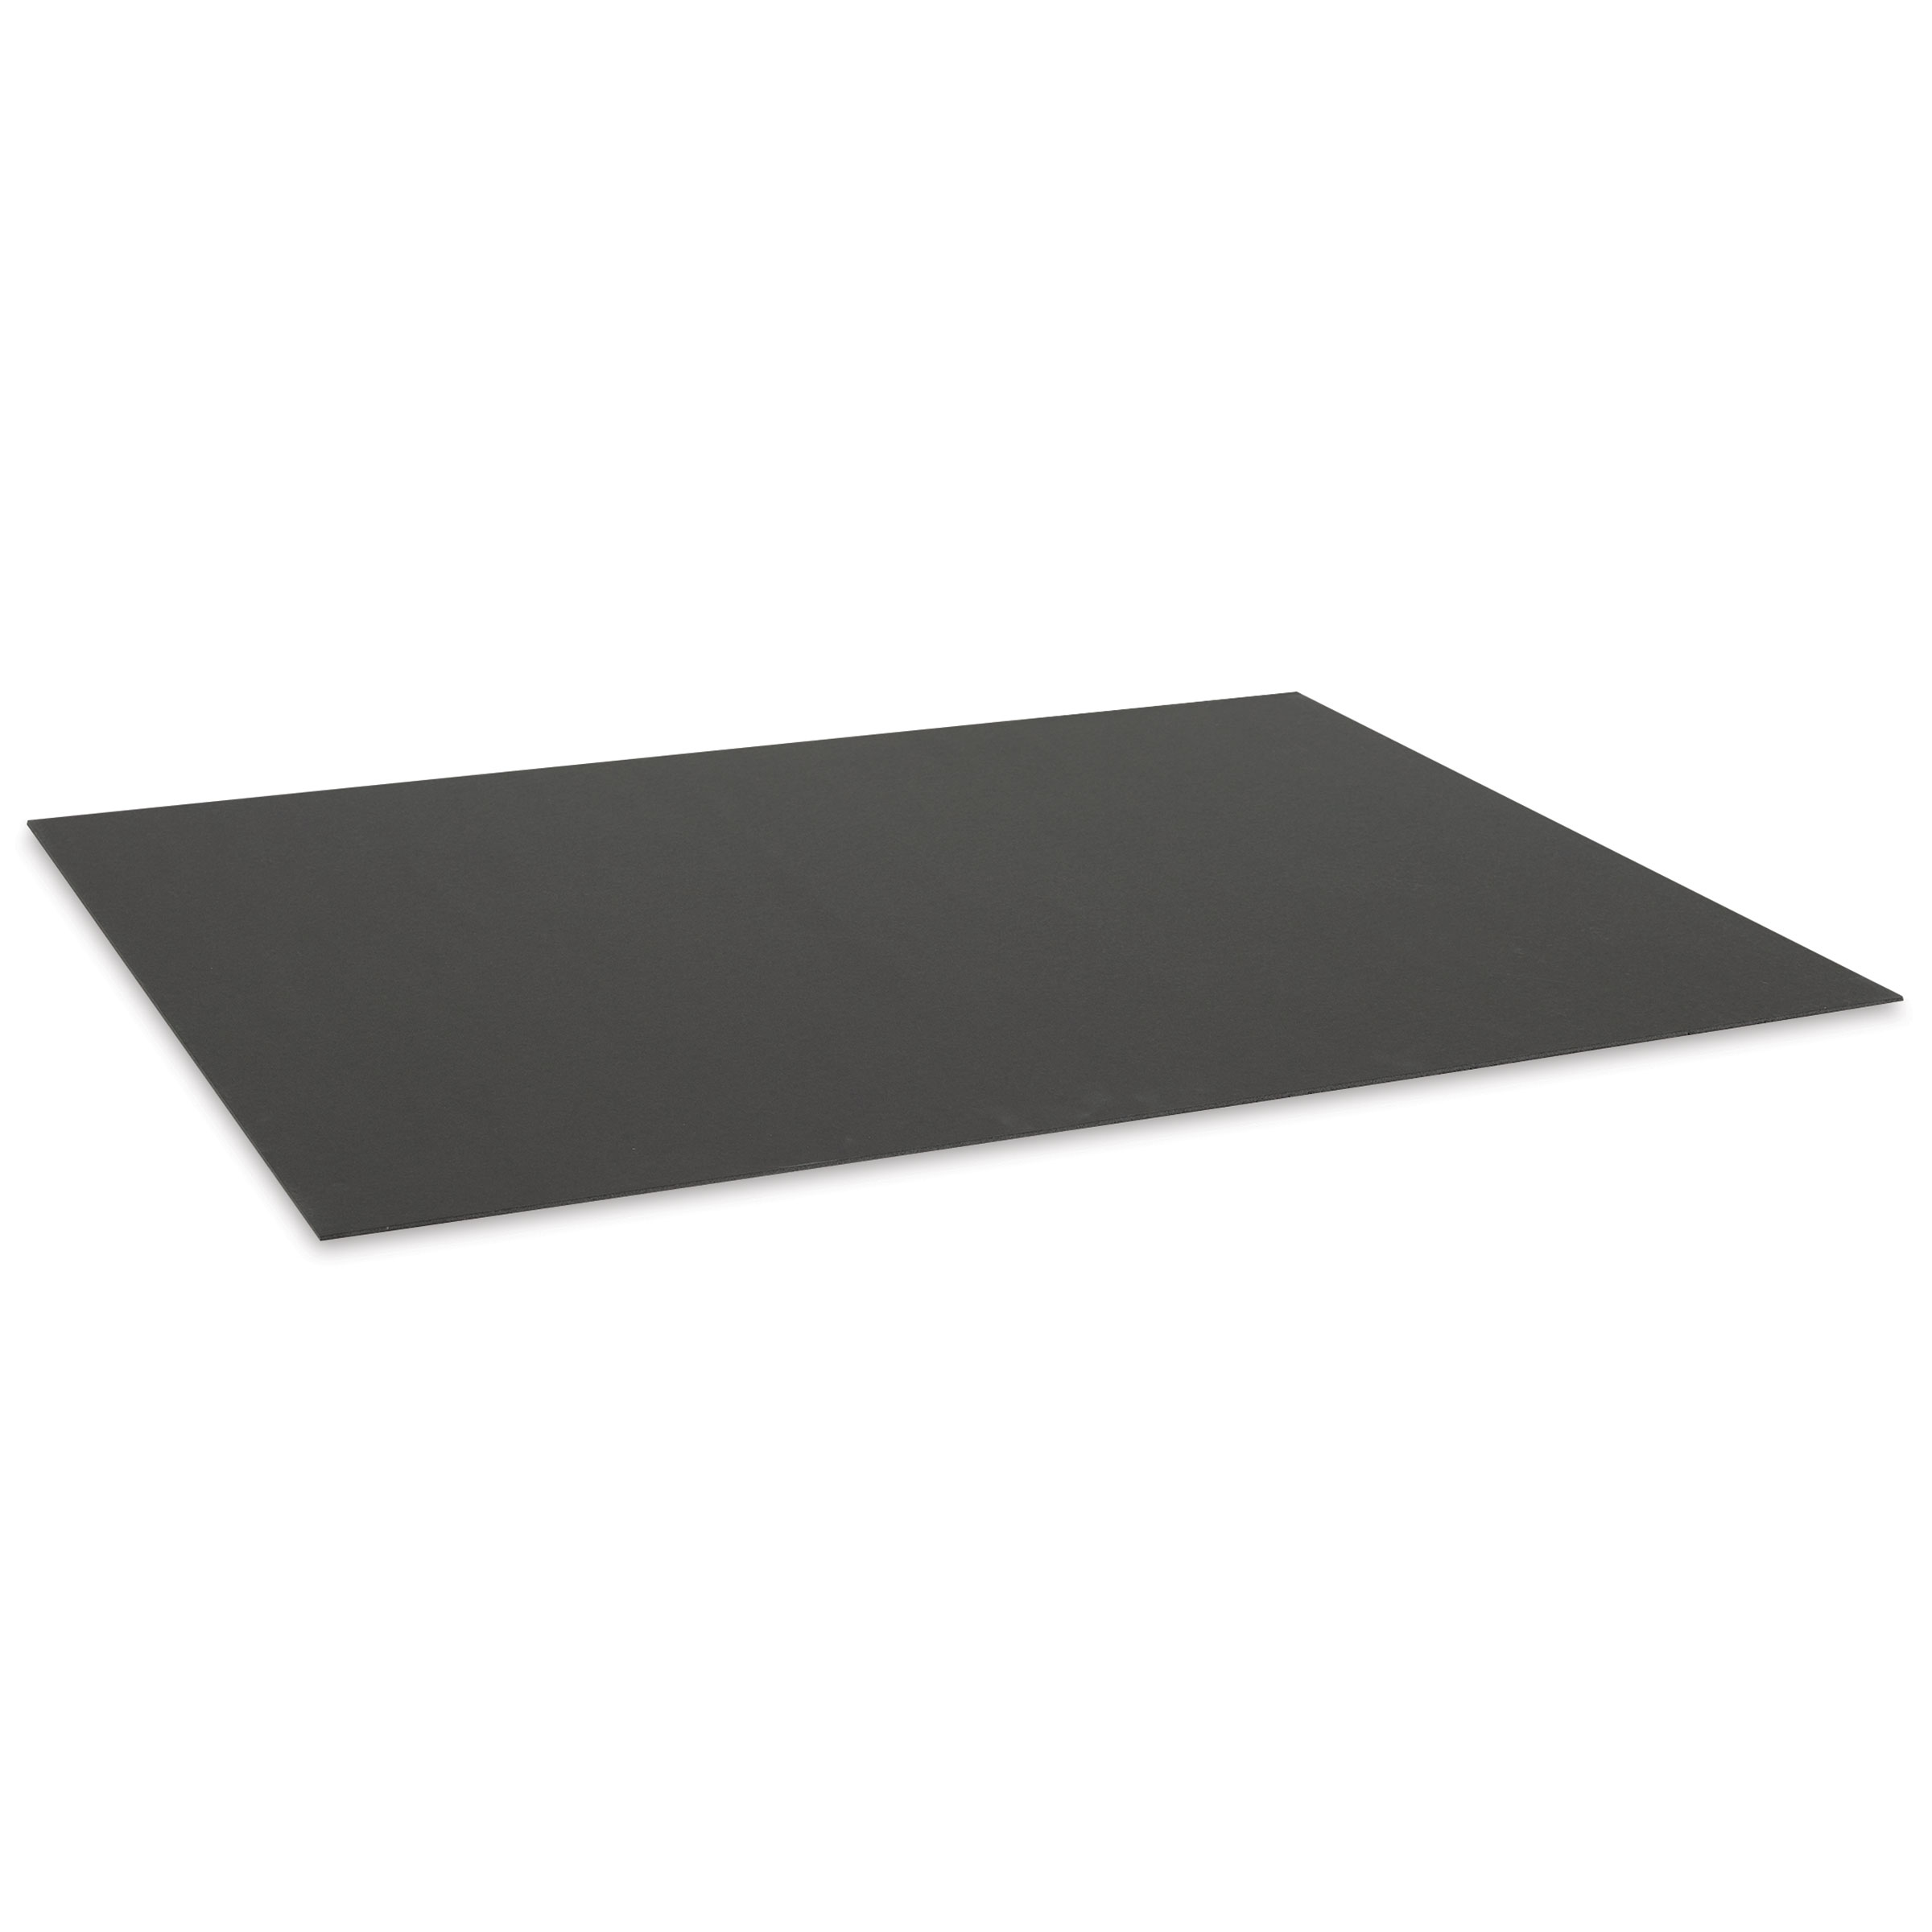 Foam Core Backing Board 3/16 Black 30x40-10 Pack. Many Sizes Available.  Acid Free Buffered Craft Poster Board for Signs, Presentations, School